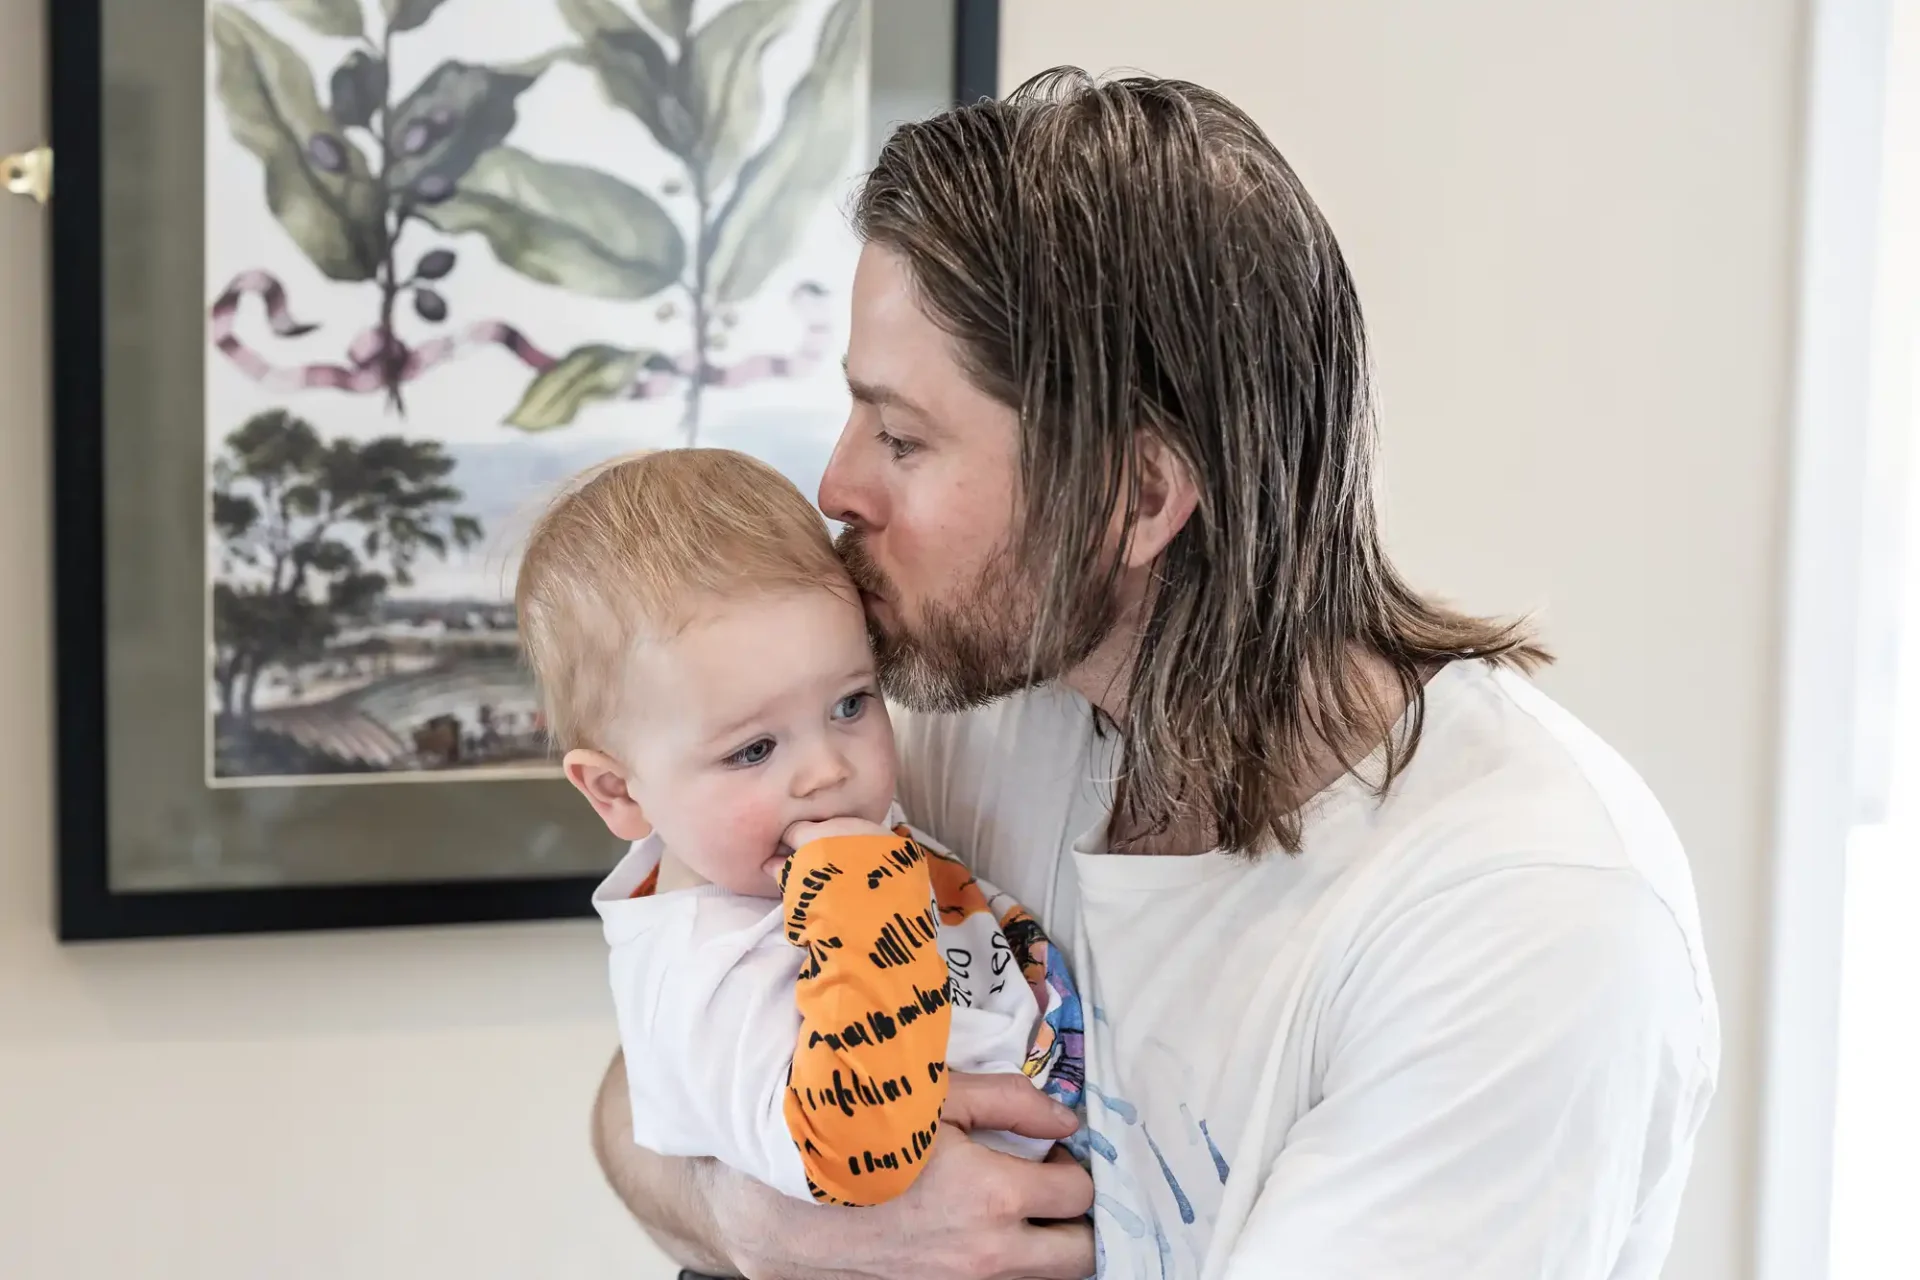 A man with long hair kisses a baby on the forehead while holding the baby in his arms. The baby is holding an orange object. A framed picture is visible in the background.